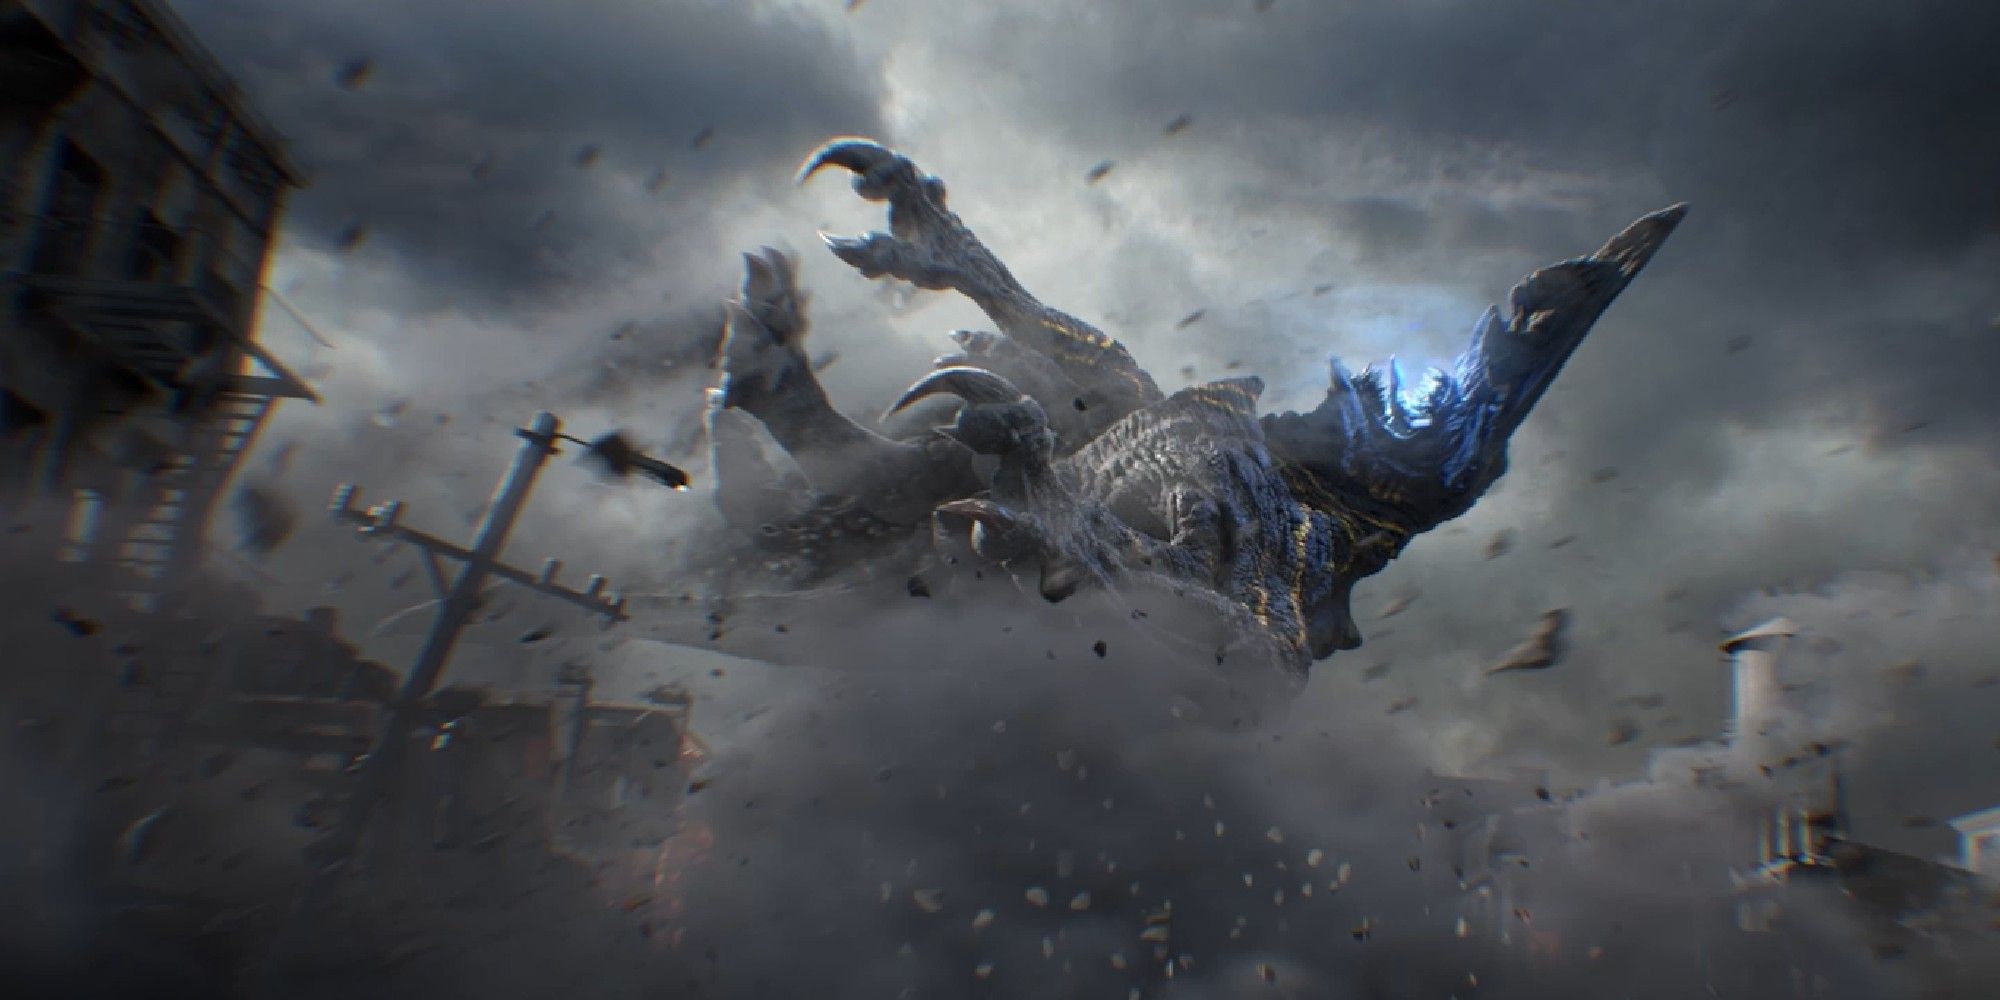 A Pacific Rim Kaiju as seen in the State of Survival trailer falls to the ground.